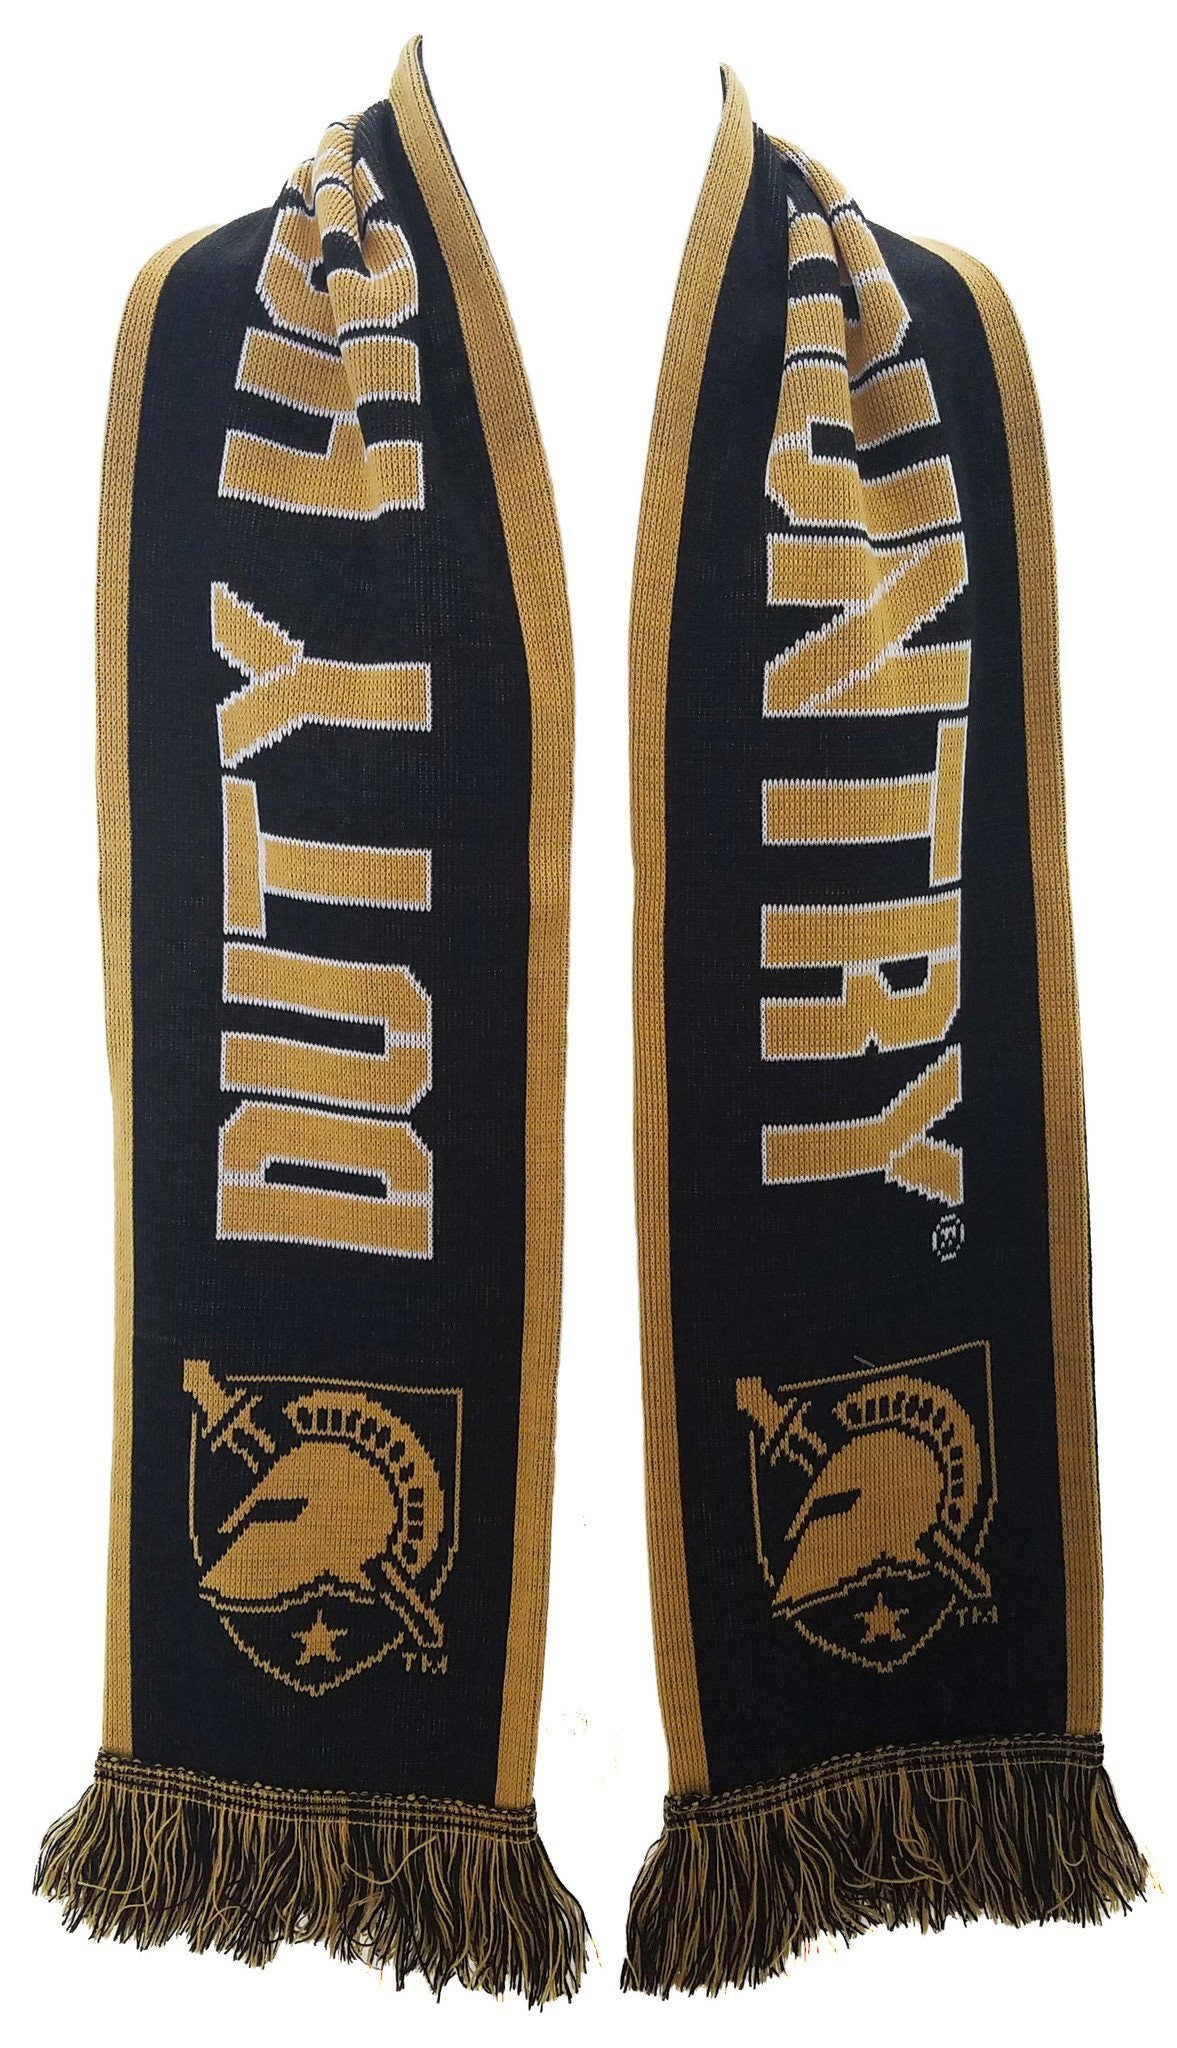 ARMY WEST POINT SCARF - Ruffneck Scarves - 3